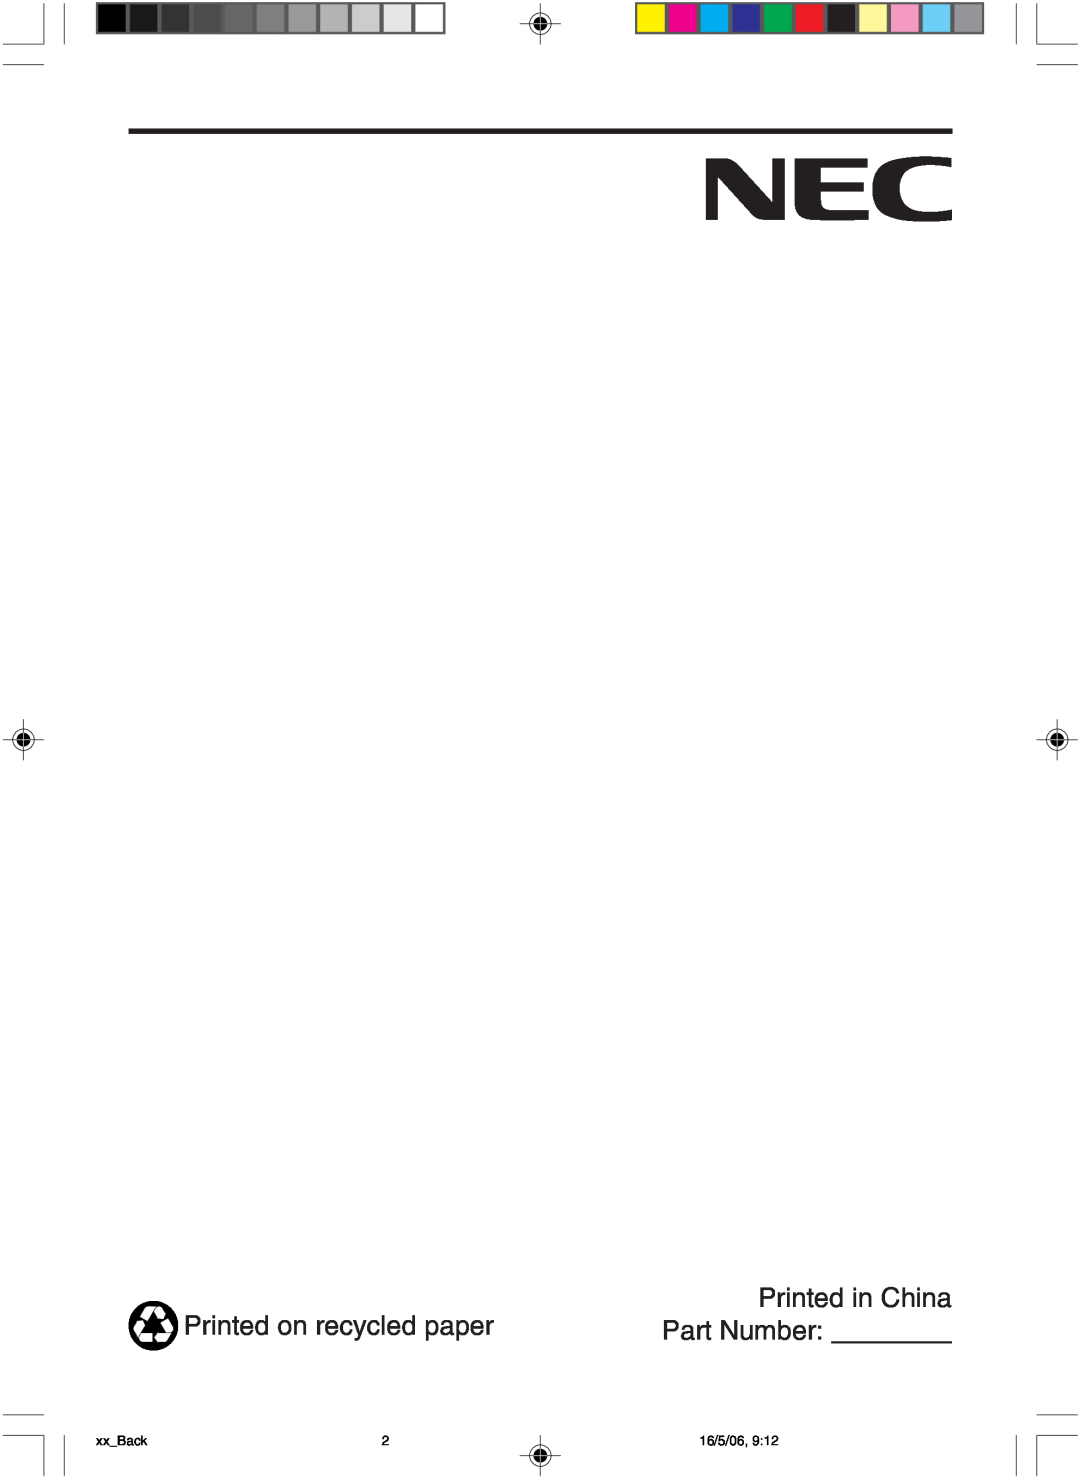 NEC LCD73VM user manual Printed on recycled paper, Part Number, xx Back, 16/5/06 